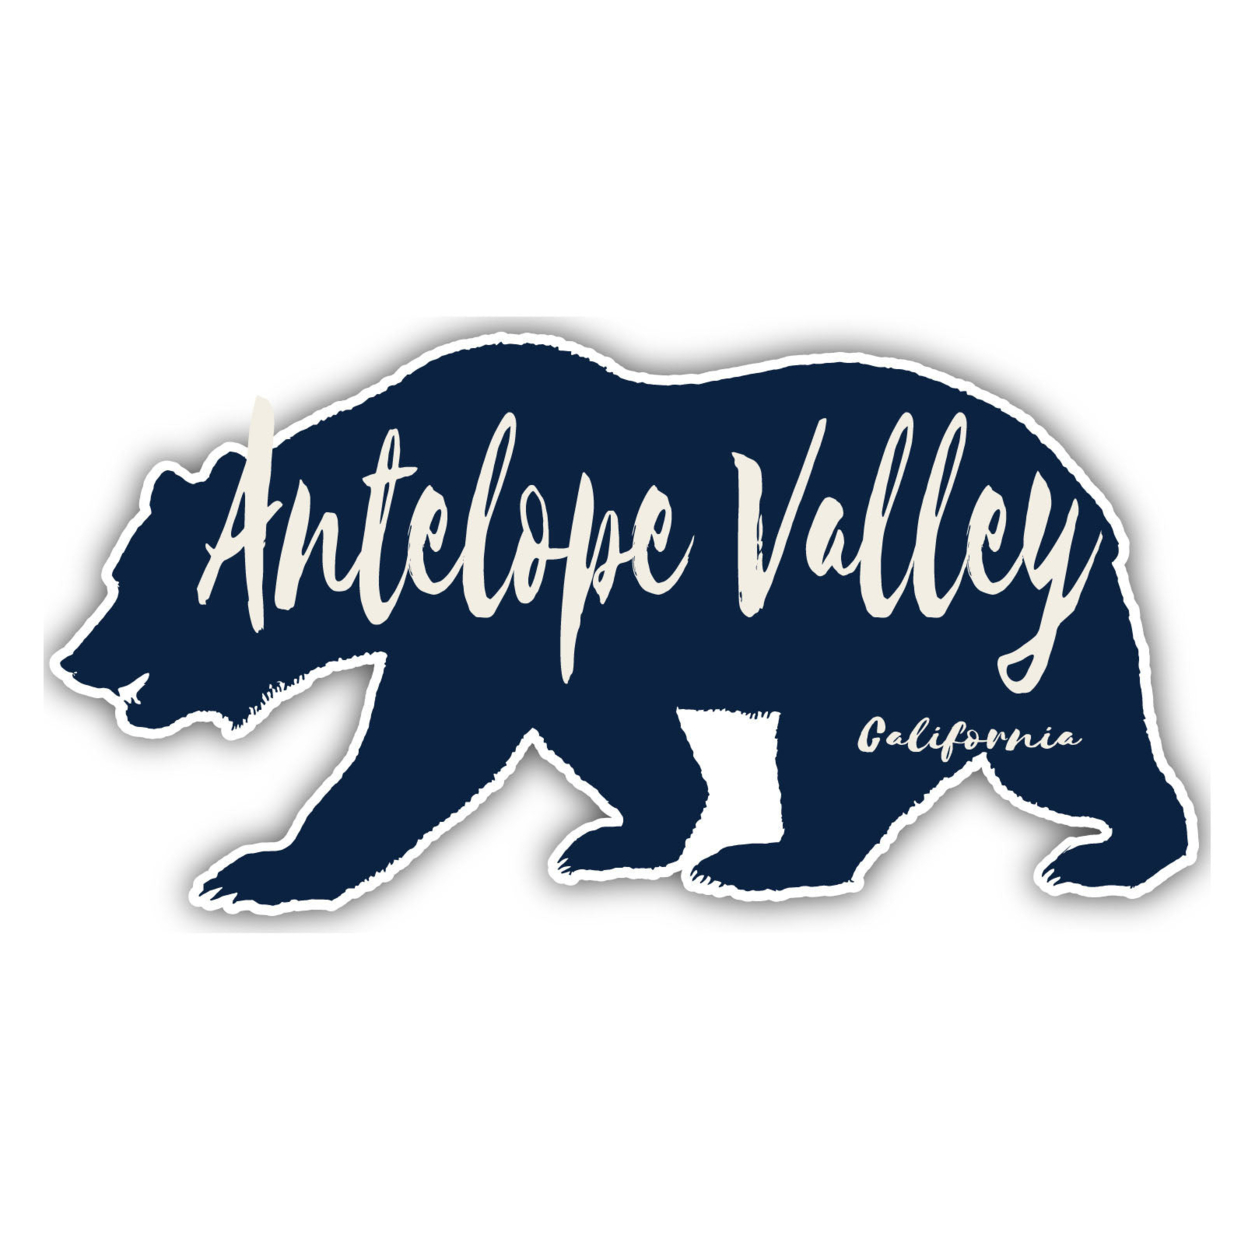 Antelope Valley California Souvenir Decorative Stickers (Choose Theme And Size) - Single Unit, 12-Inch, Camp Life